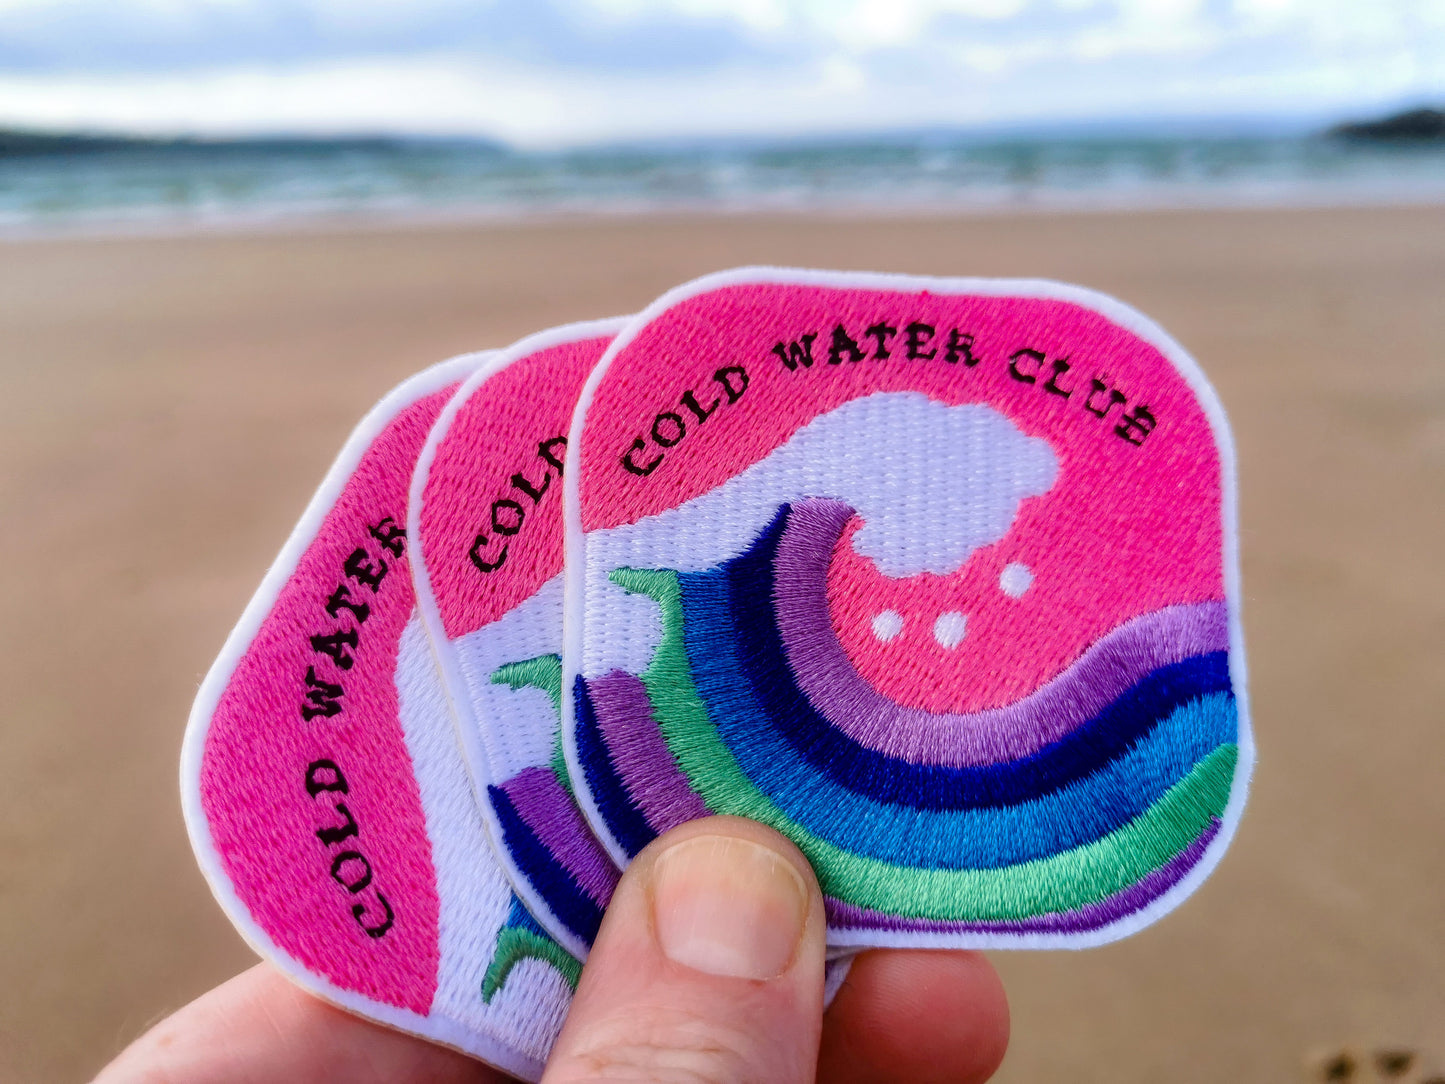 'COLD WATER CLUB' Patch